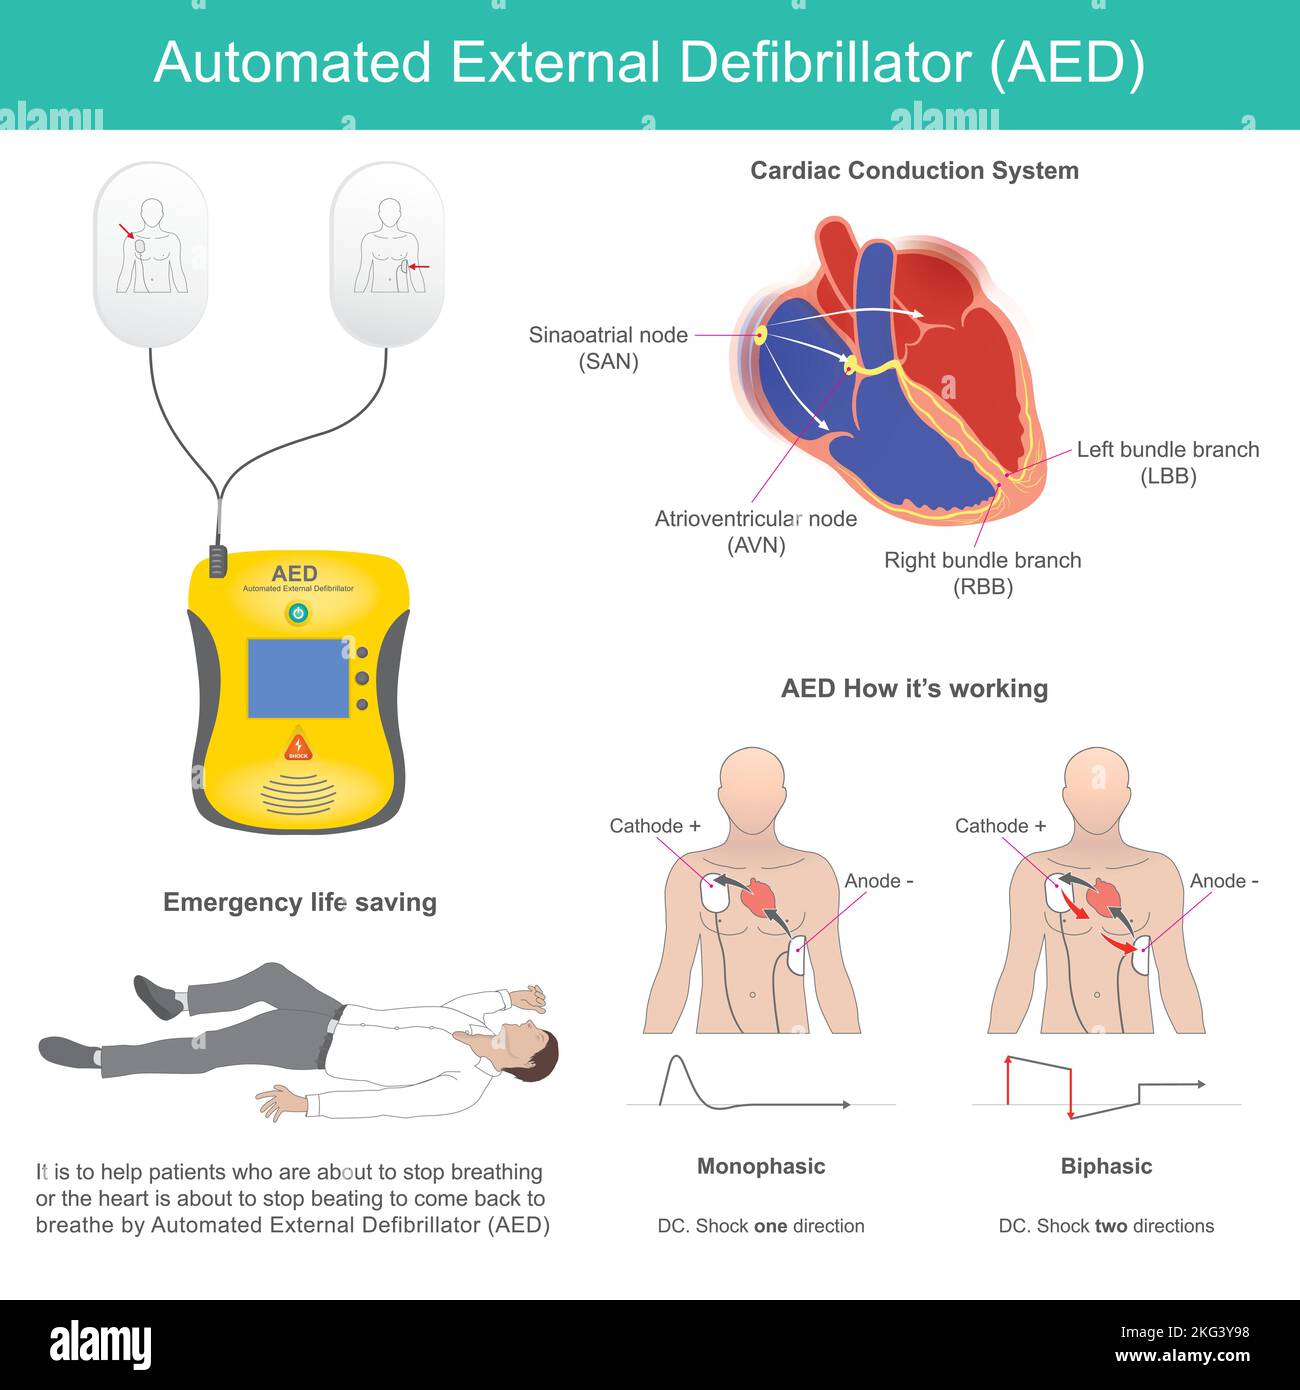 Automated External Defibrillator. It is electronic device for life support that recognises ventricular fibrillation and other dysrhythmias and deliver Stock Vector